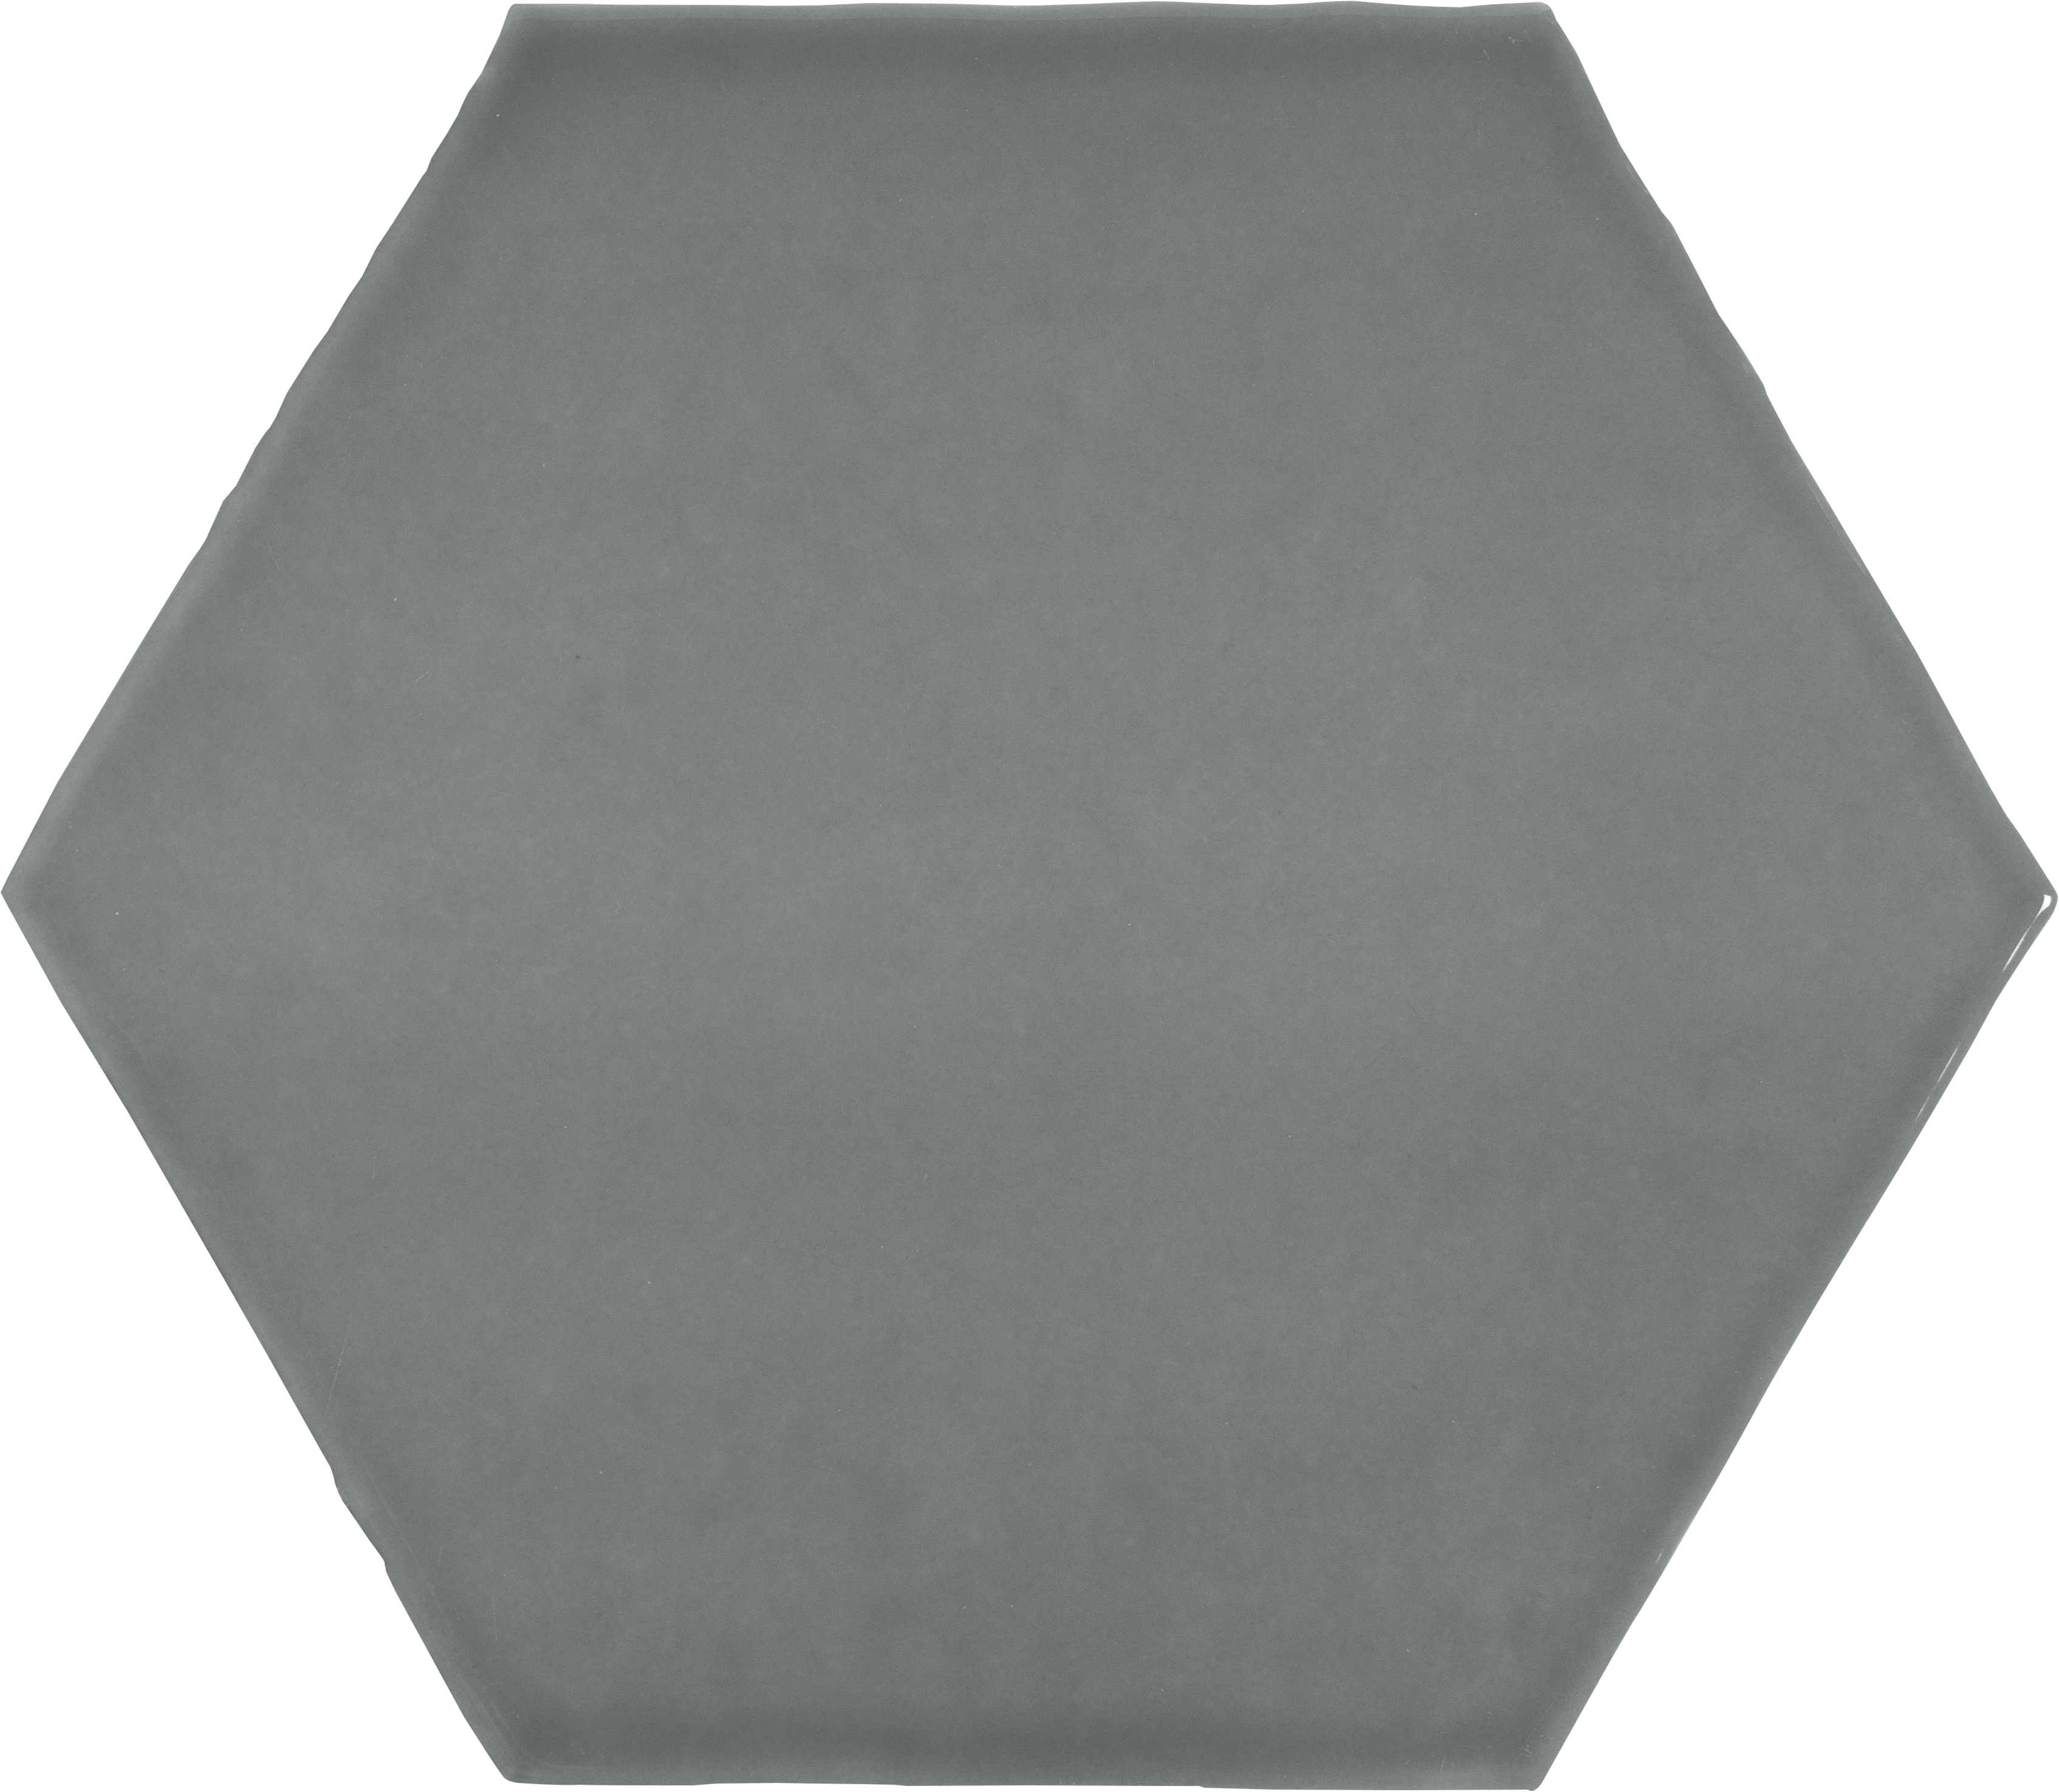 charcoal pattern glazed ceramic field tile from teramoda anatolia collection distributed by surface group international glossy finish pressed edge 6-inch hexagon shape